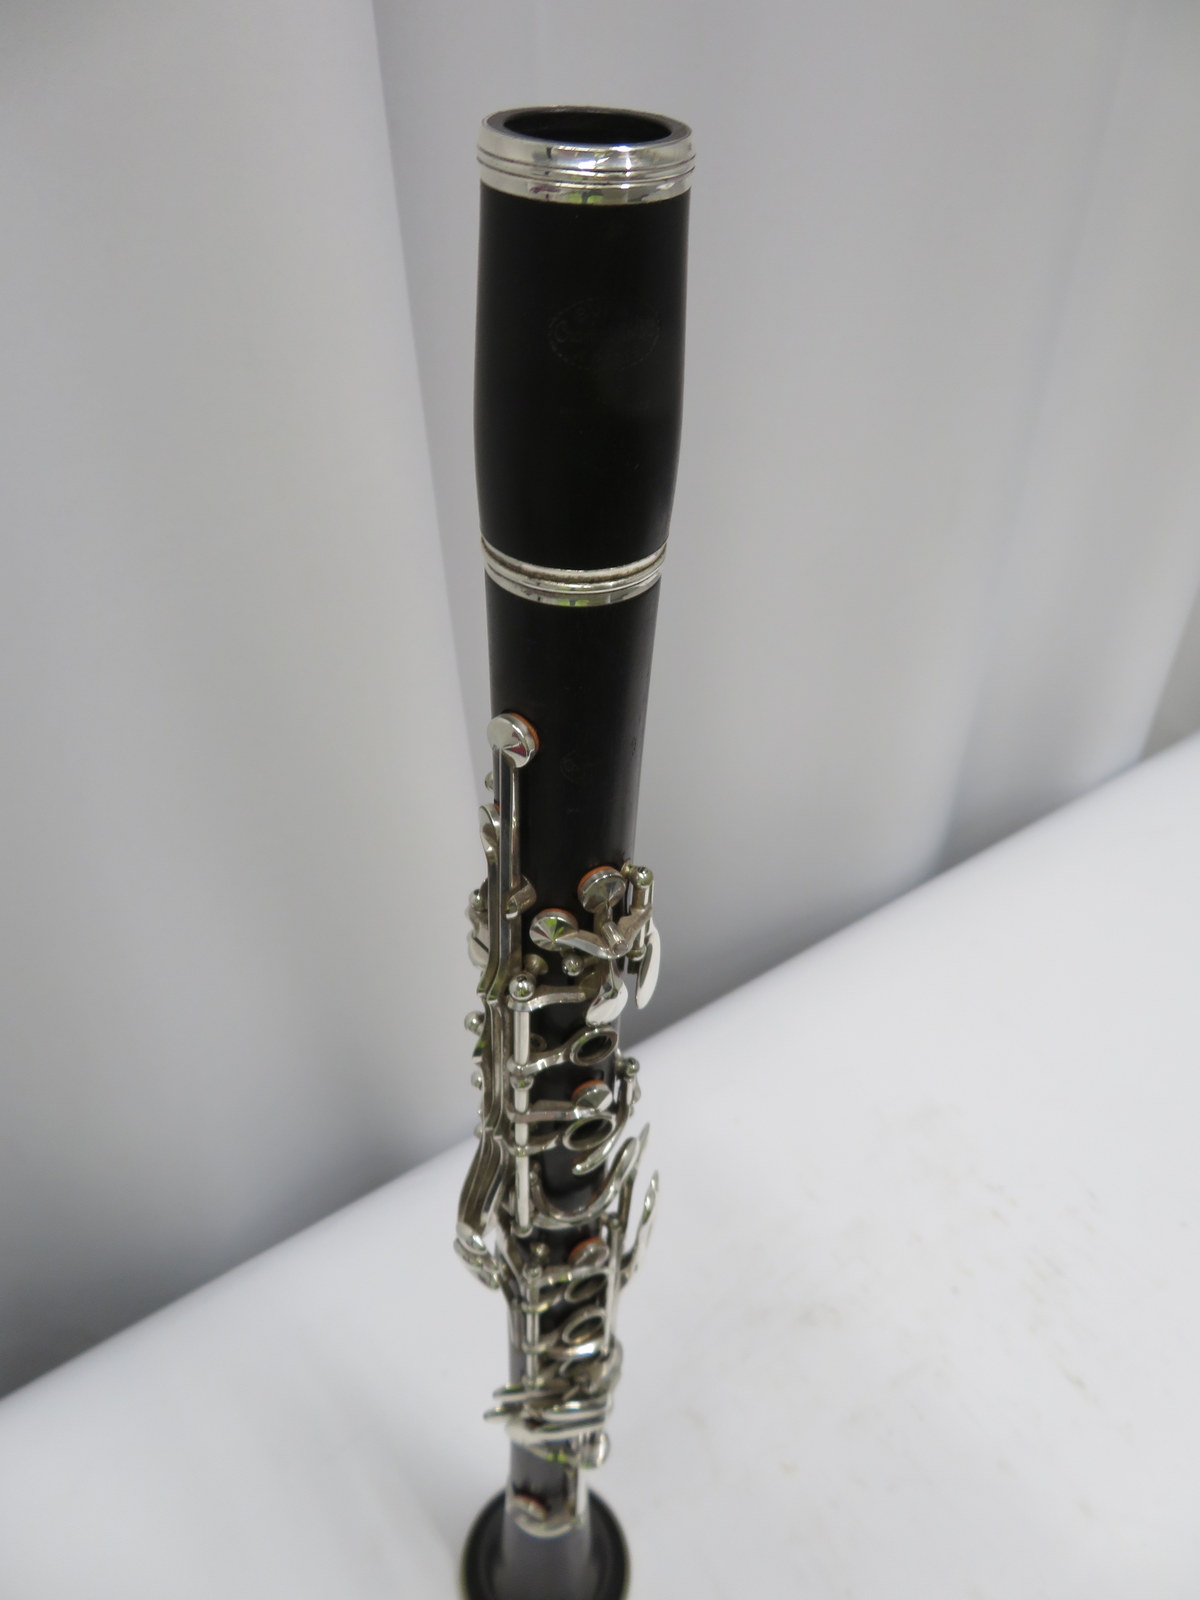 Buffet Crampon R13 clarinet with case. Serial number: 524961. - Image 4 of 17